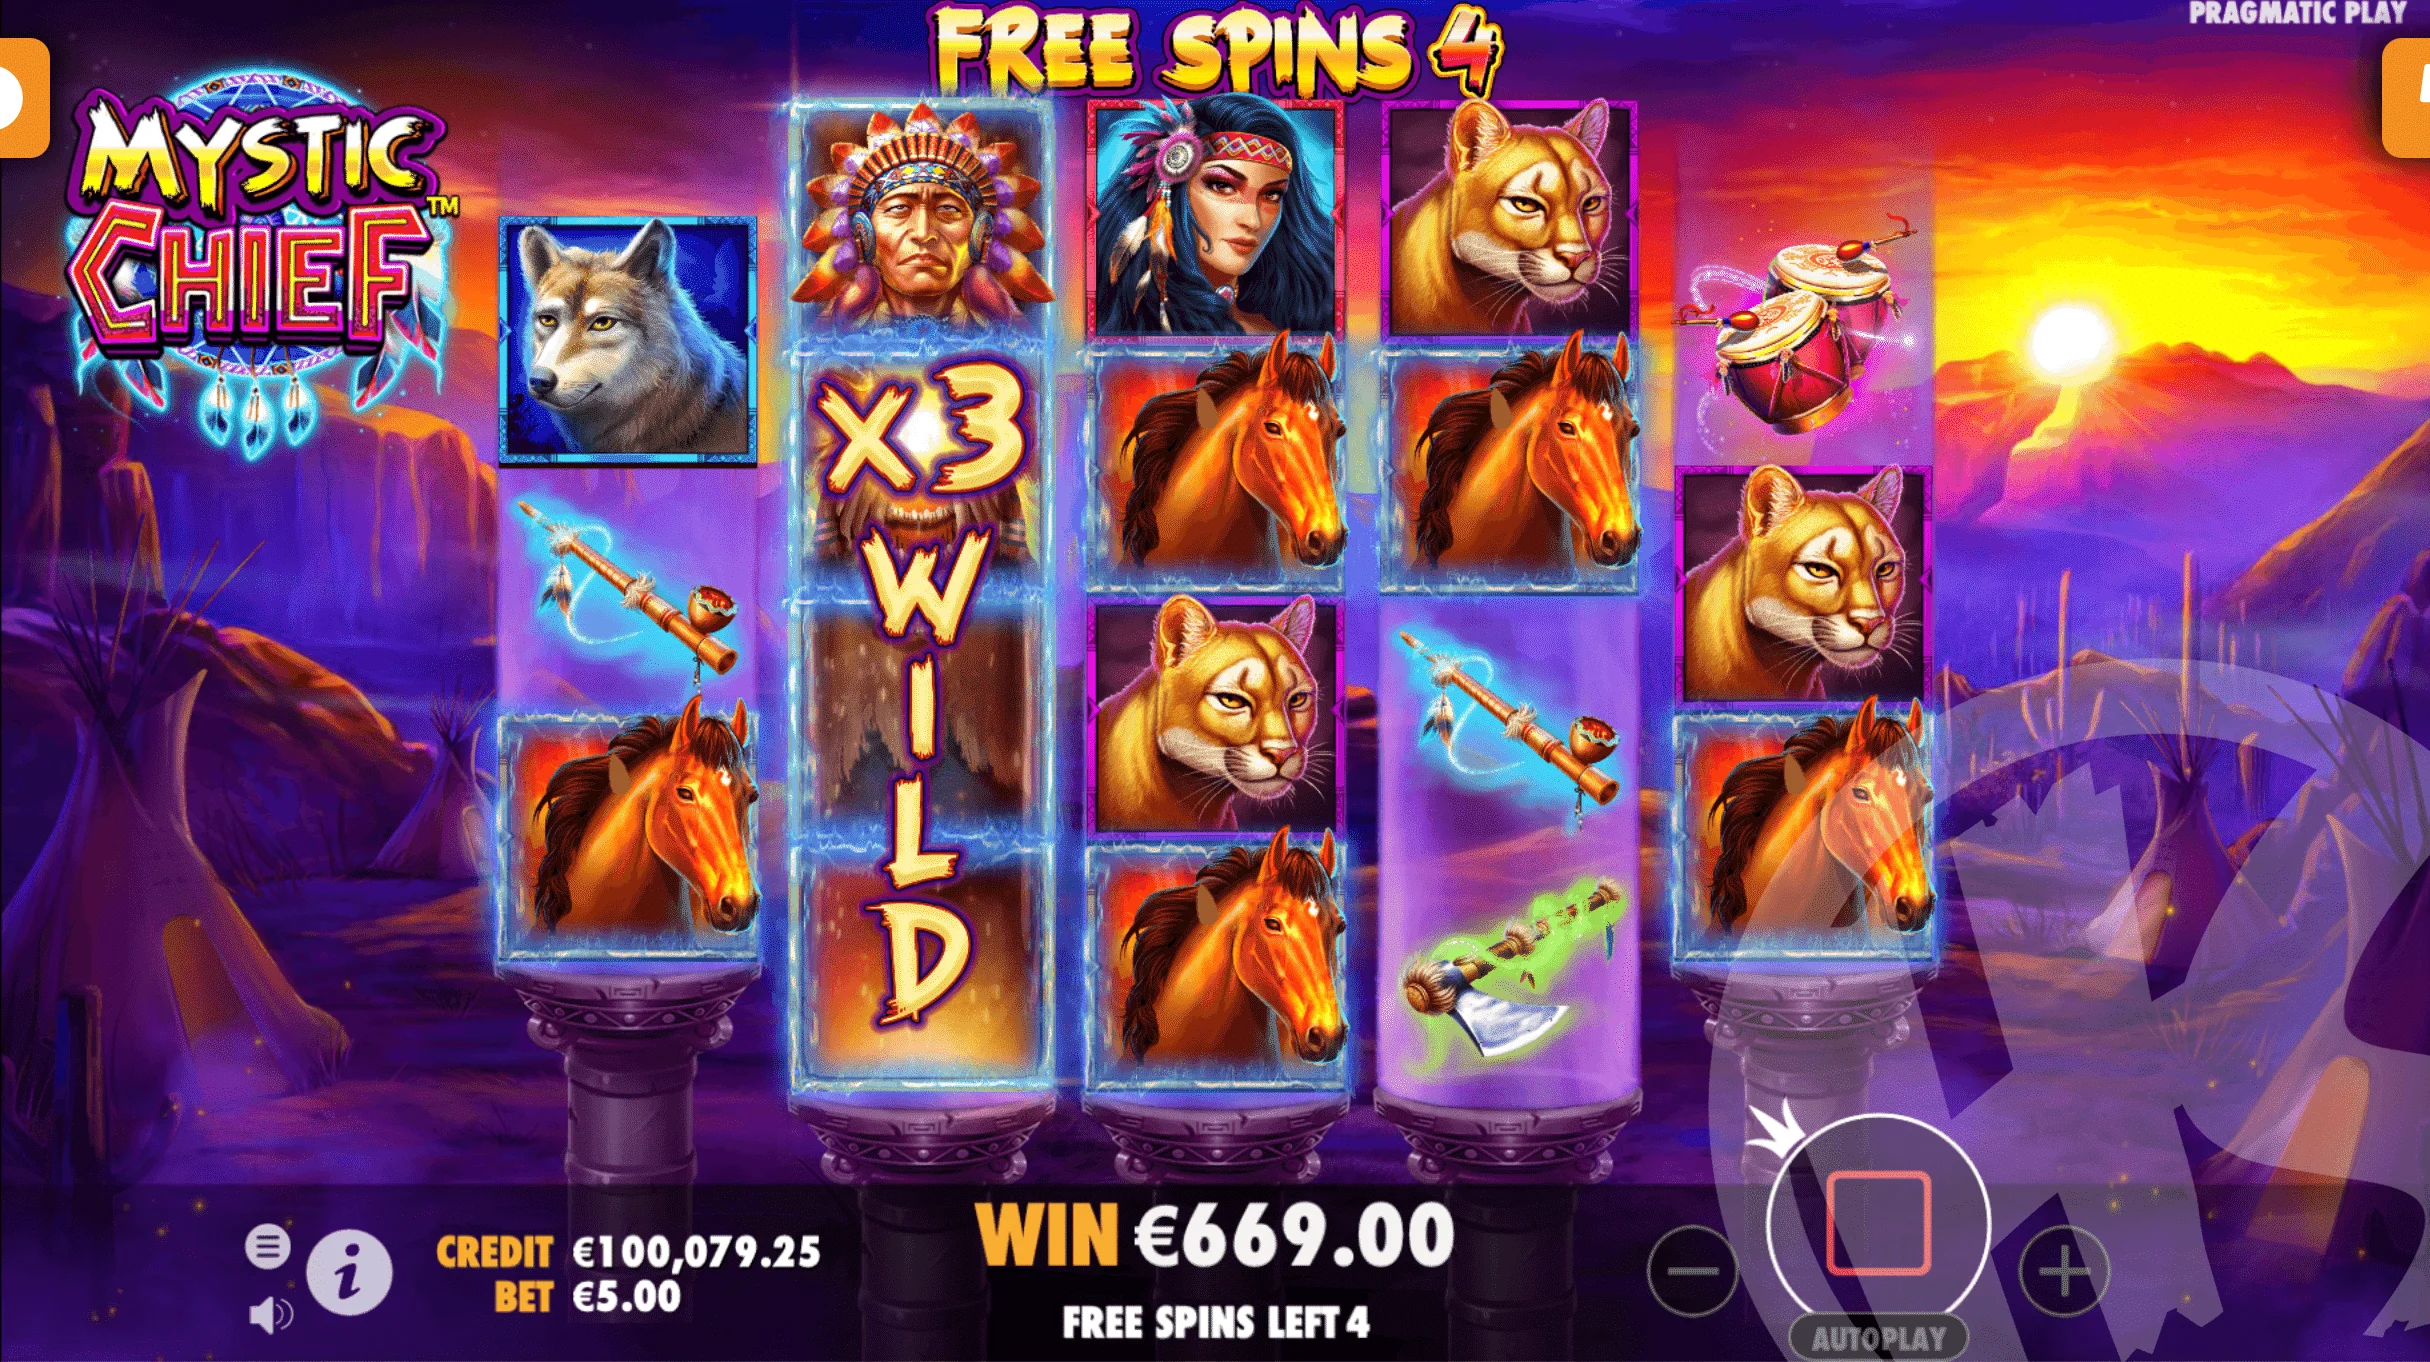 3 Scatters Trigger 8 Free Spins